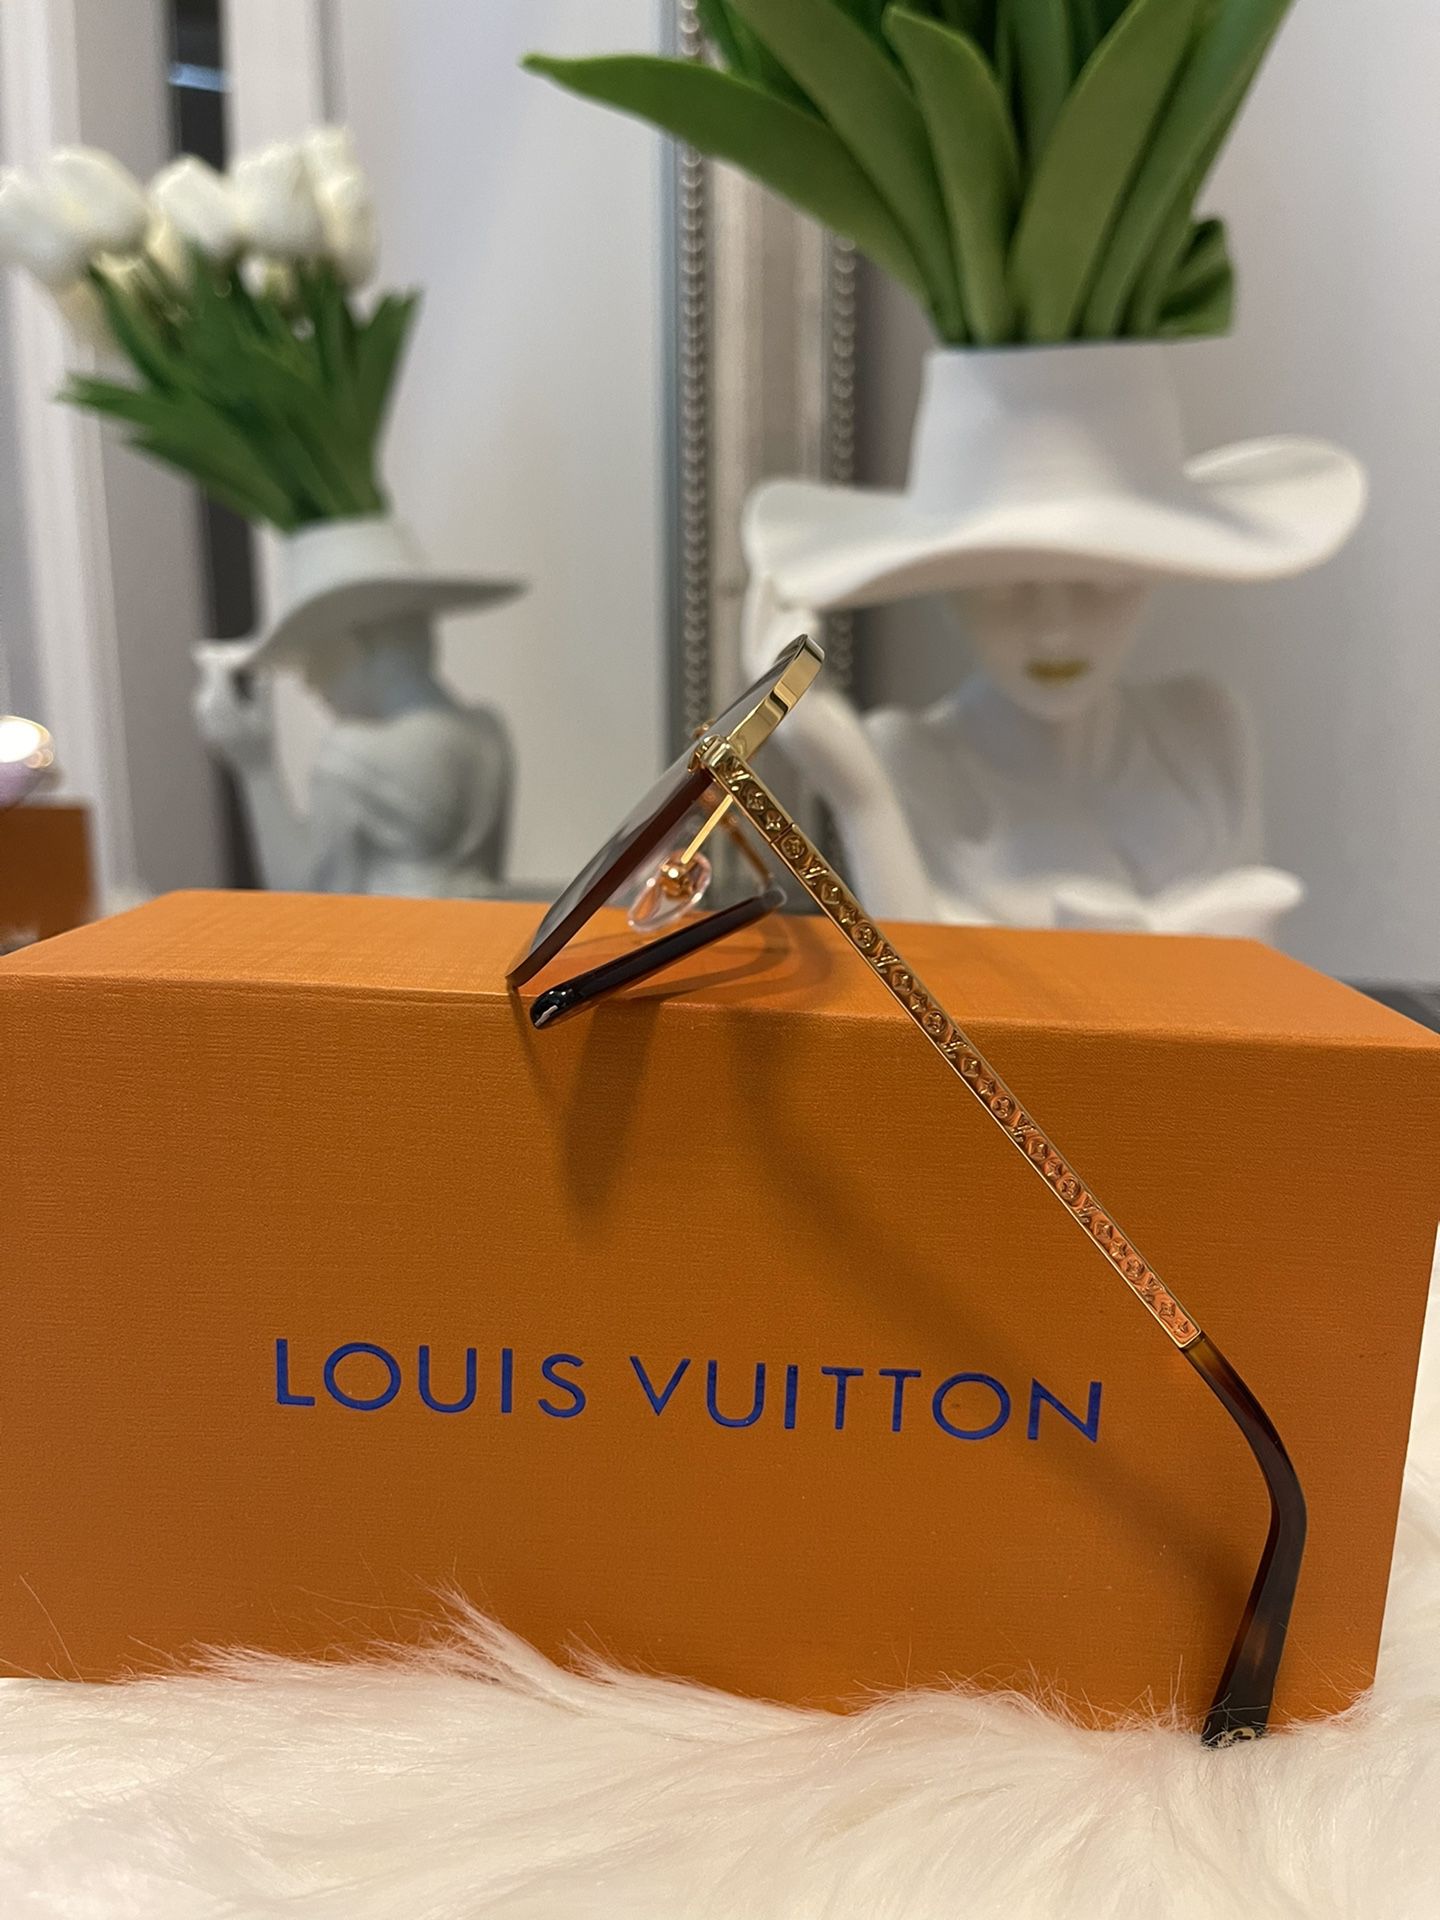 LOUIS VUITTON SUNGLASSES- Pink-woman for Sale in Bedford Hills, NY - OfferUp